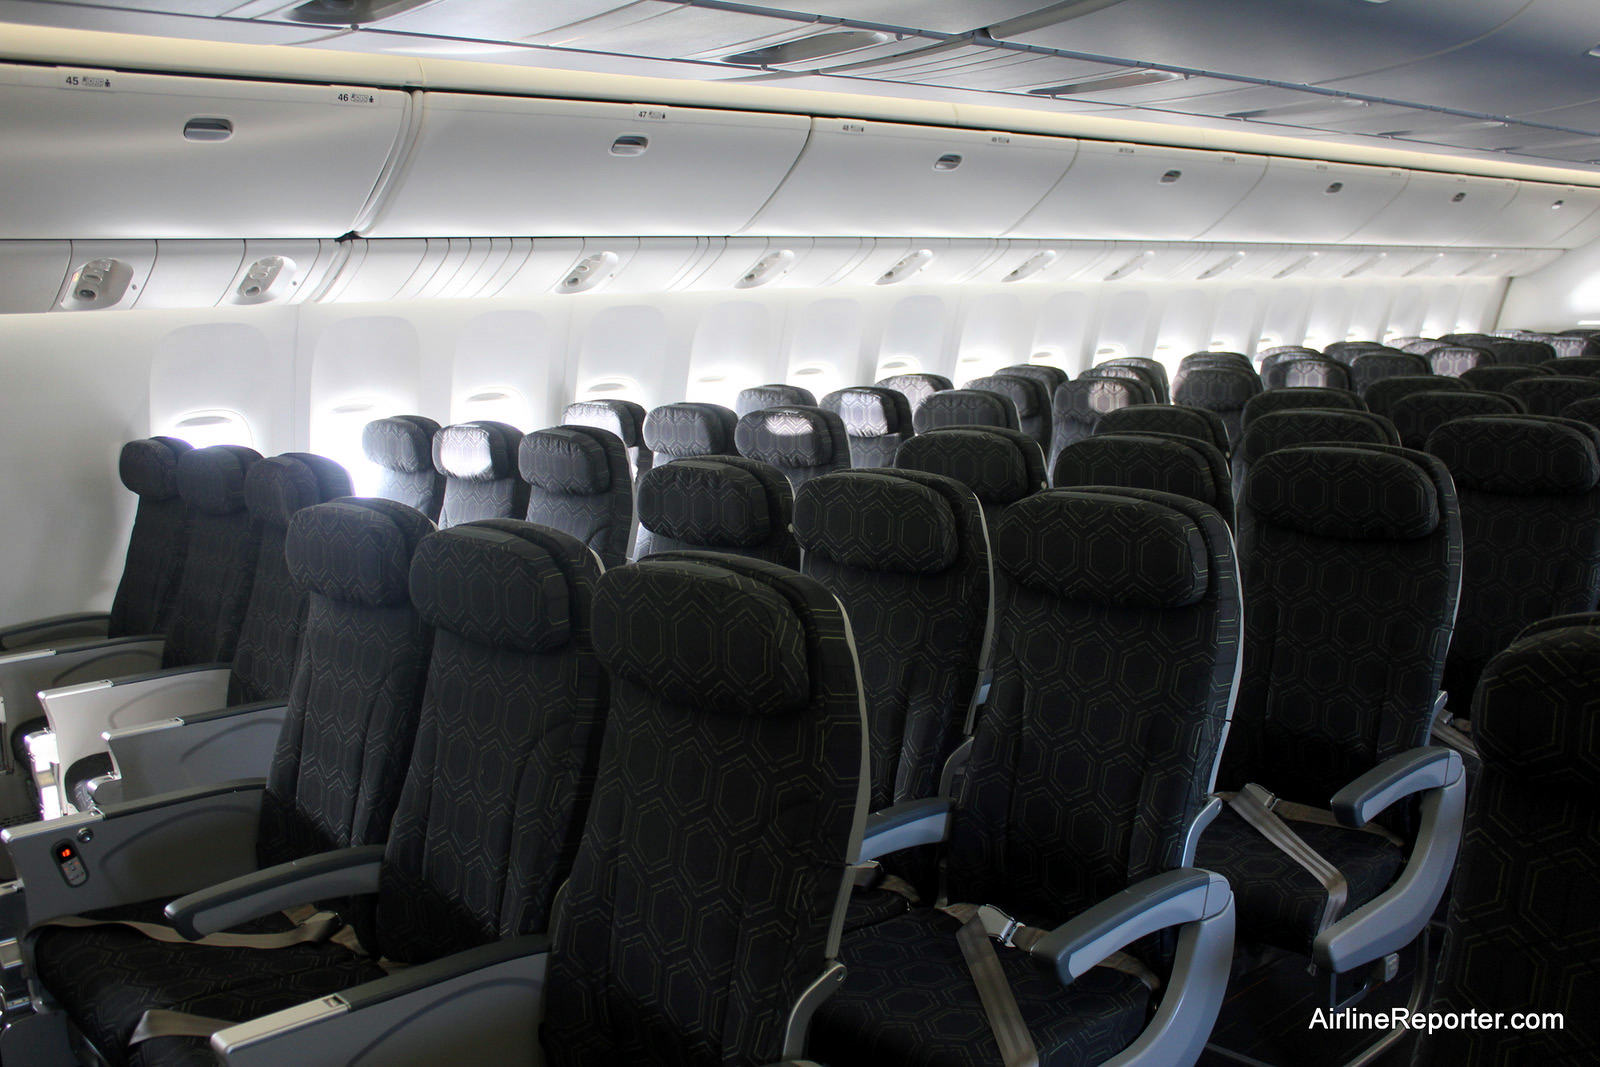 Inside Look: 9 vs 10 Abreast Economy Seating in the 777 : AirlineReporter